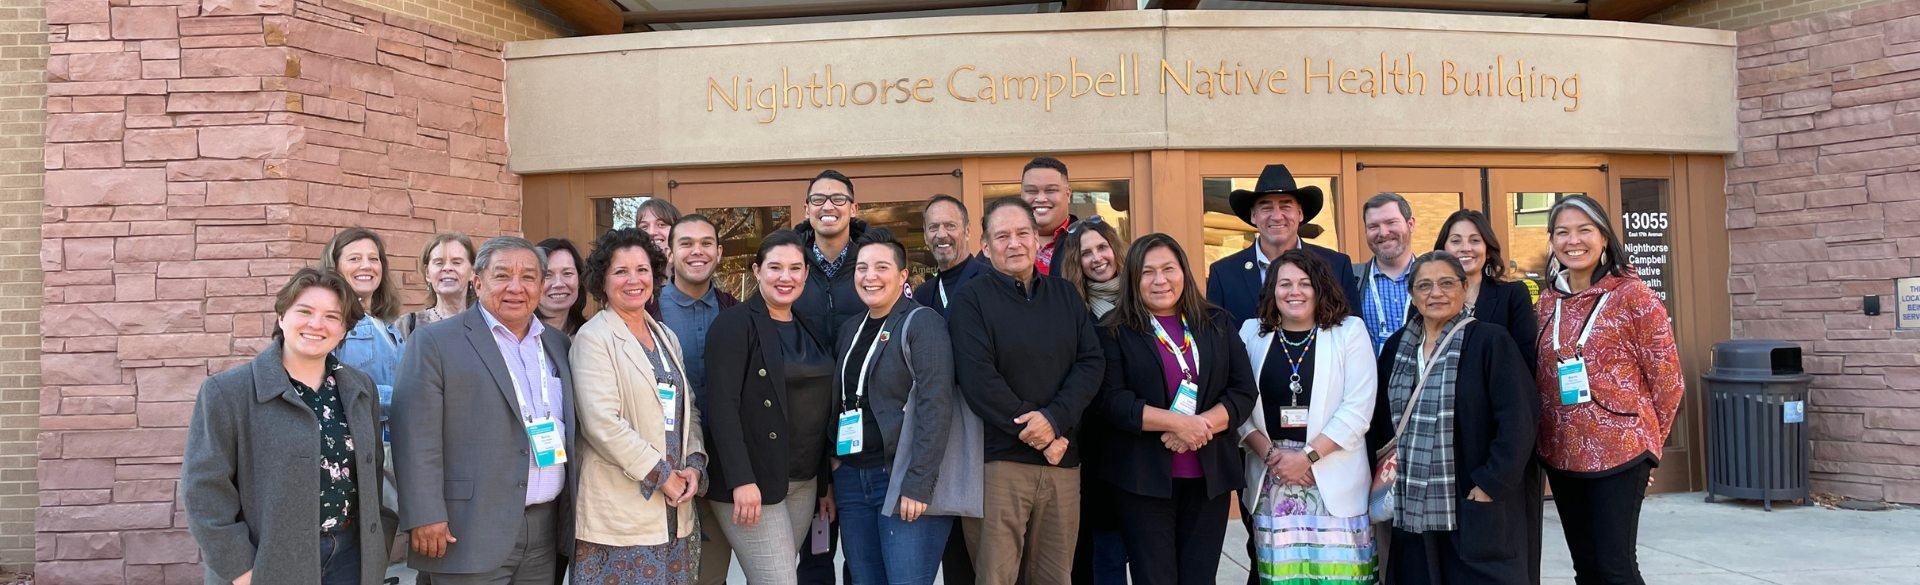 CAIANH Team in front of Nighthorse Campbell Building